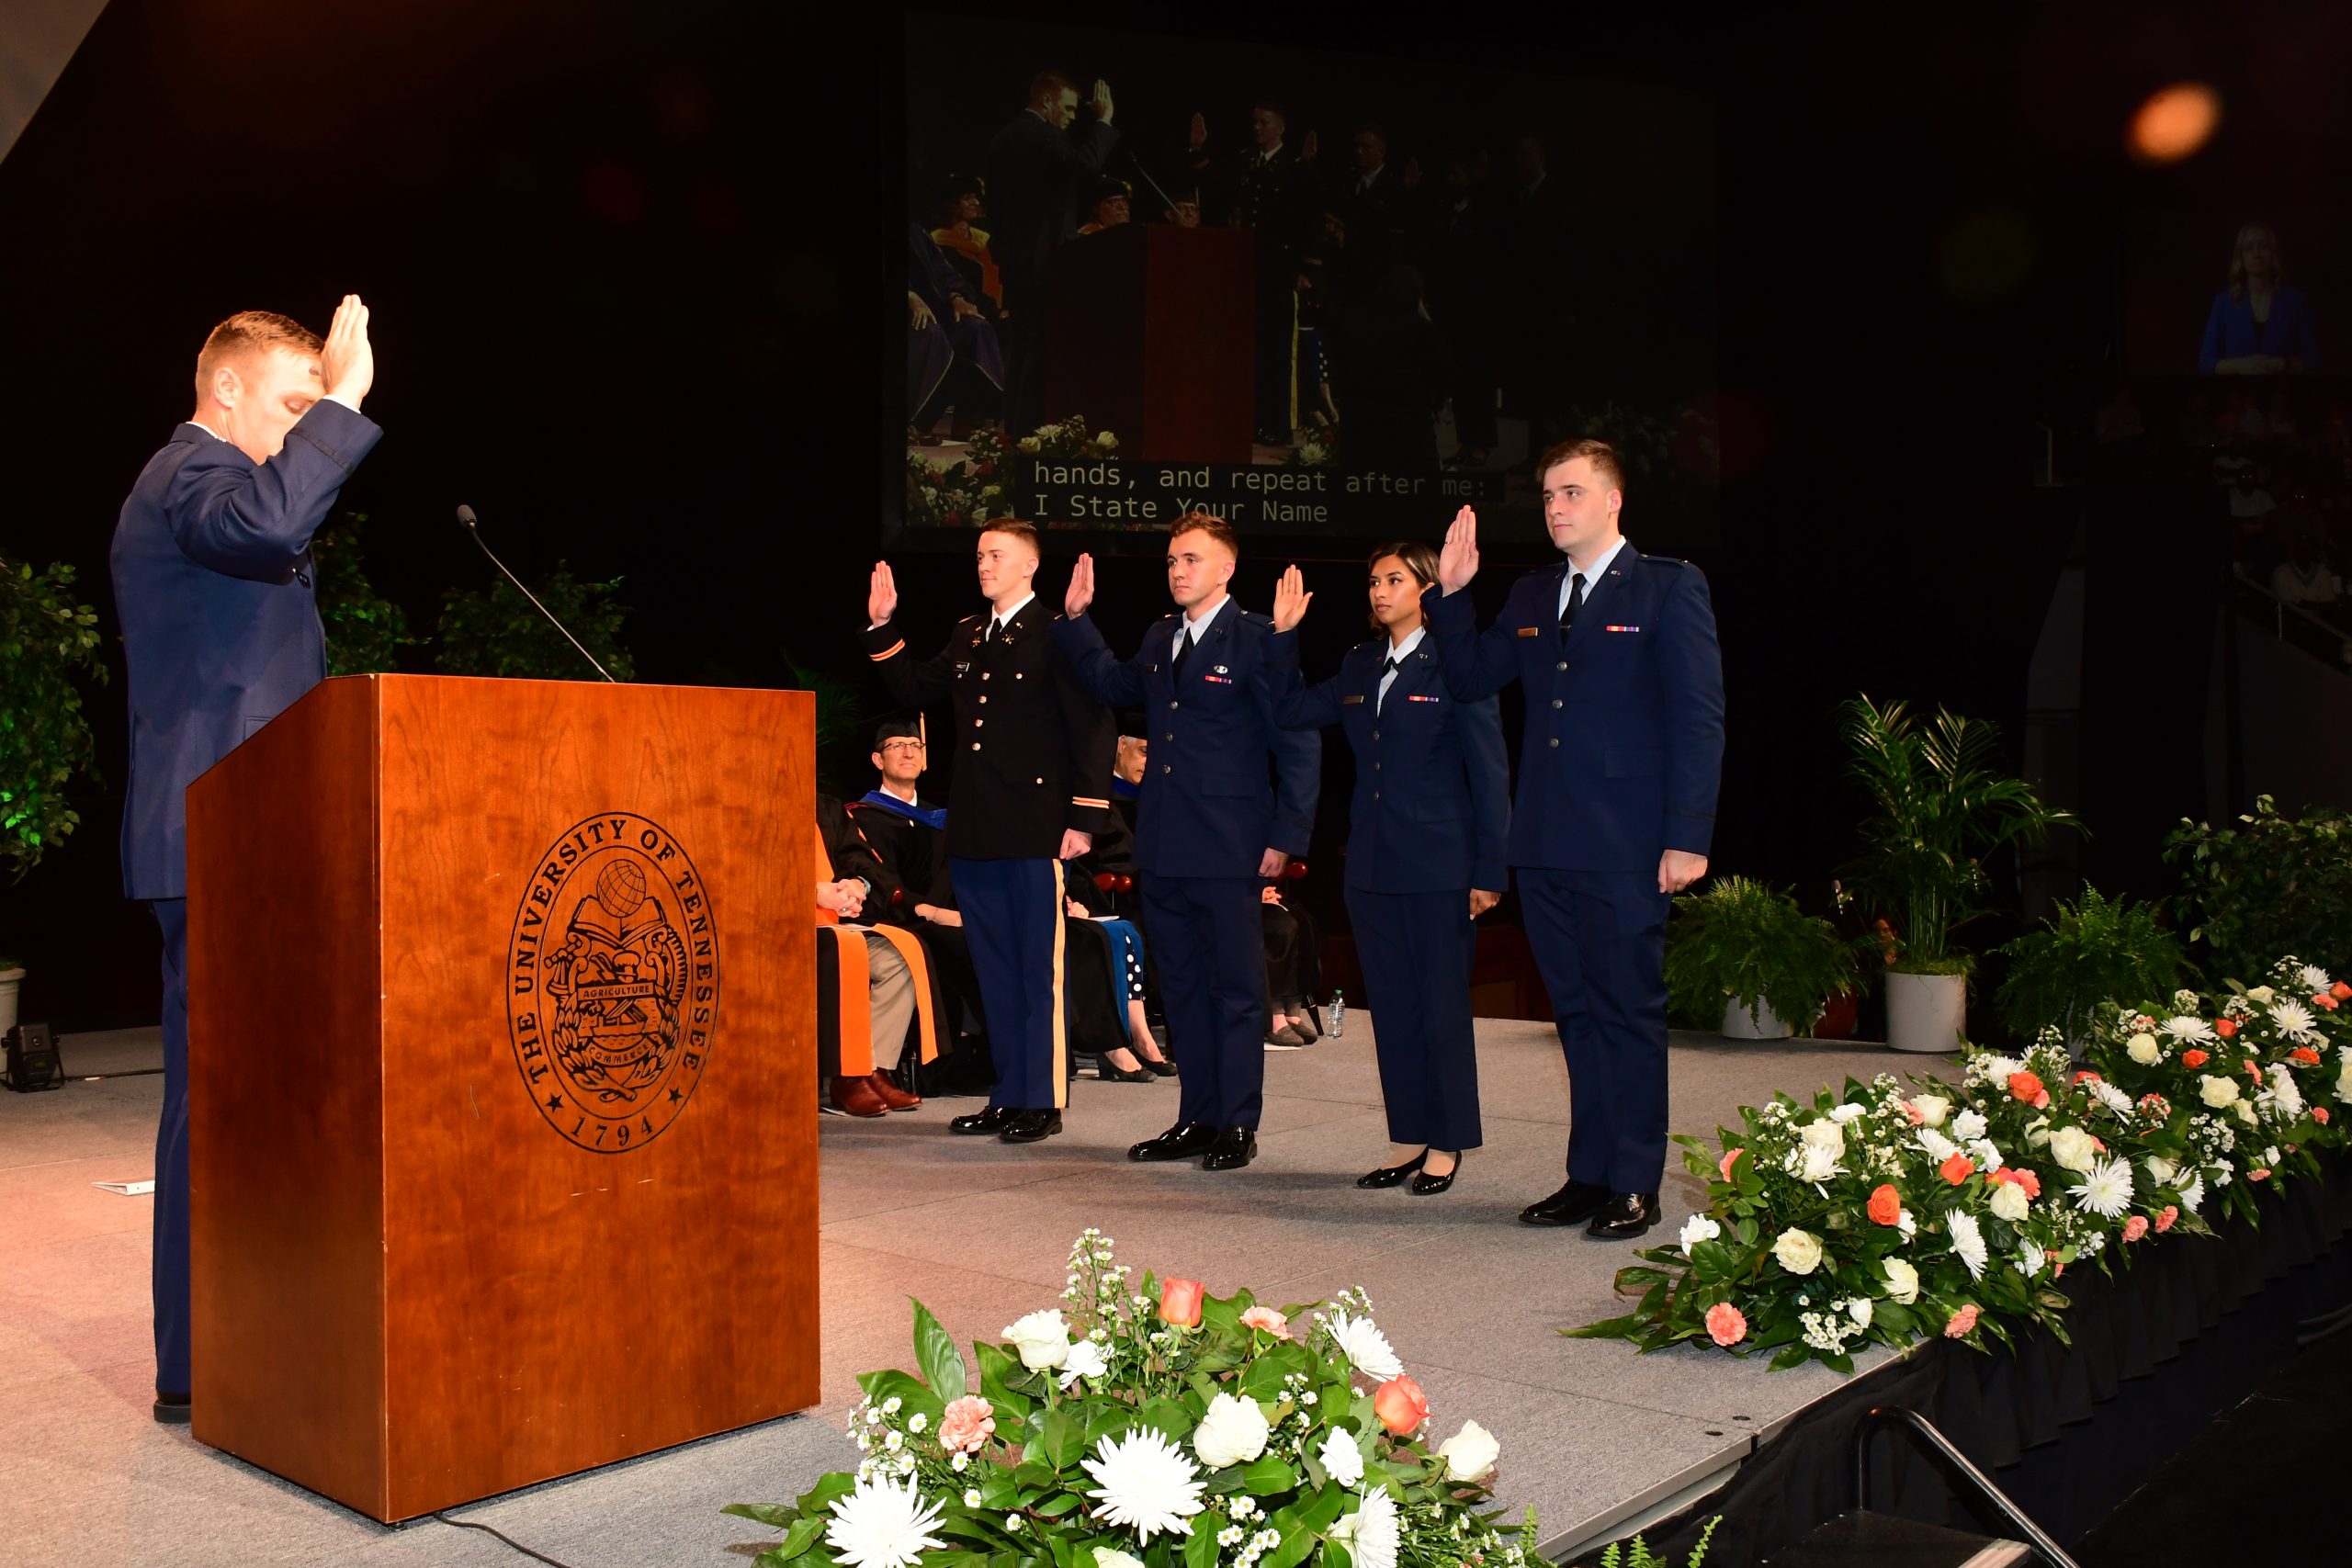 Graduates from the Tickle College of Engineering are sworn in to the military during the commencement ceremony.